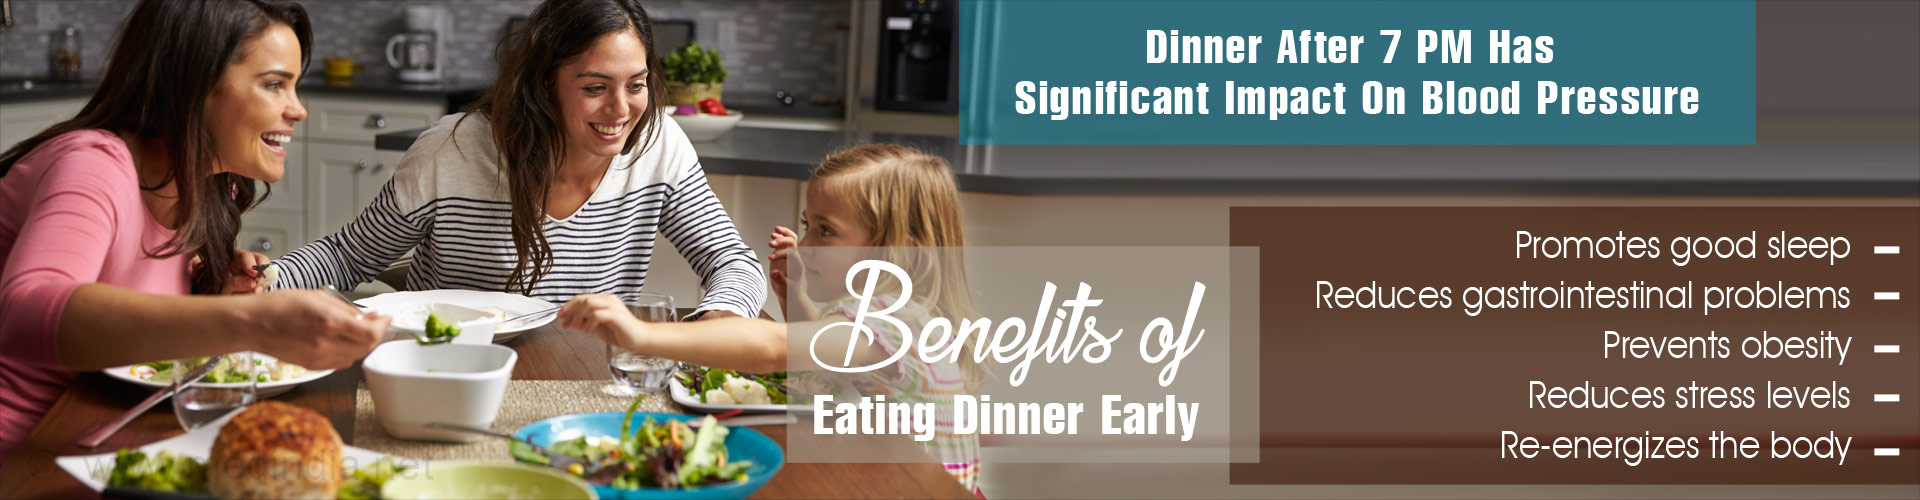 Dinner after 7 pm Has Significant Impact on Blood Pressure

Benefits of Eating Dinner Early
- Promotes good sleep
- Reduces gastrointestinal problems
- Reduces stress levels
- Re-energizes the body